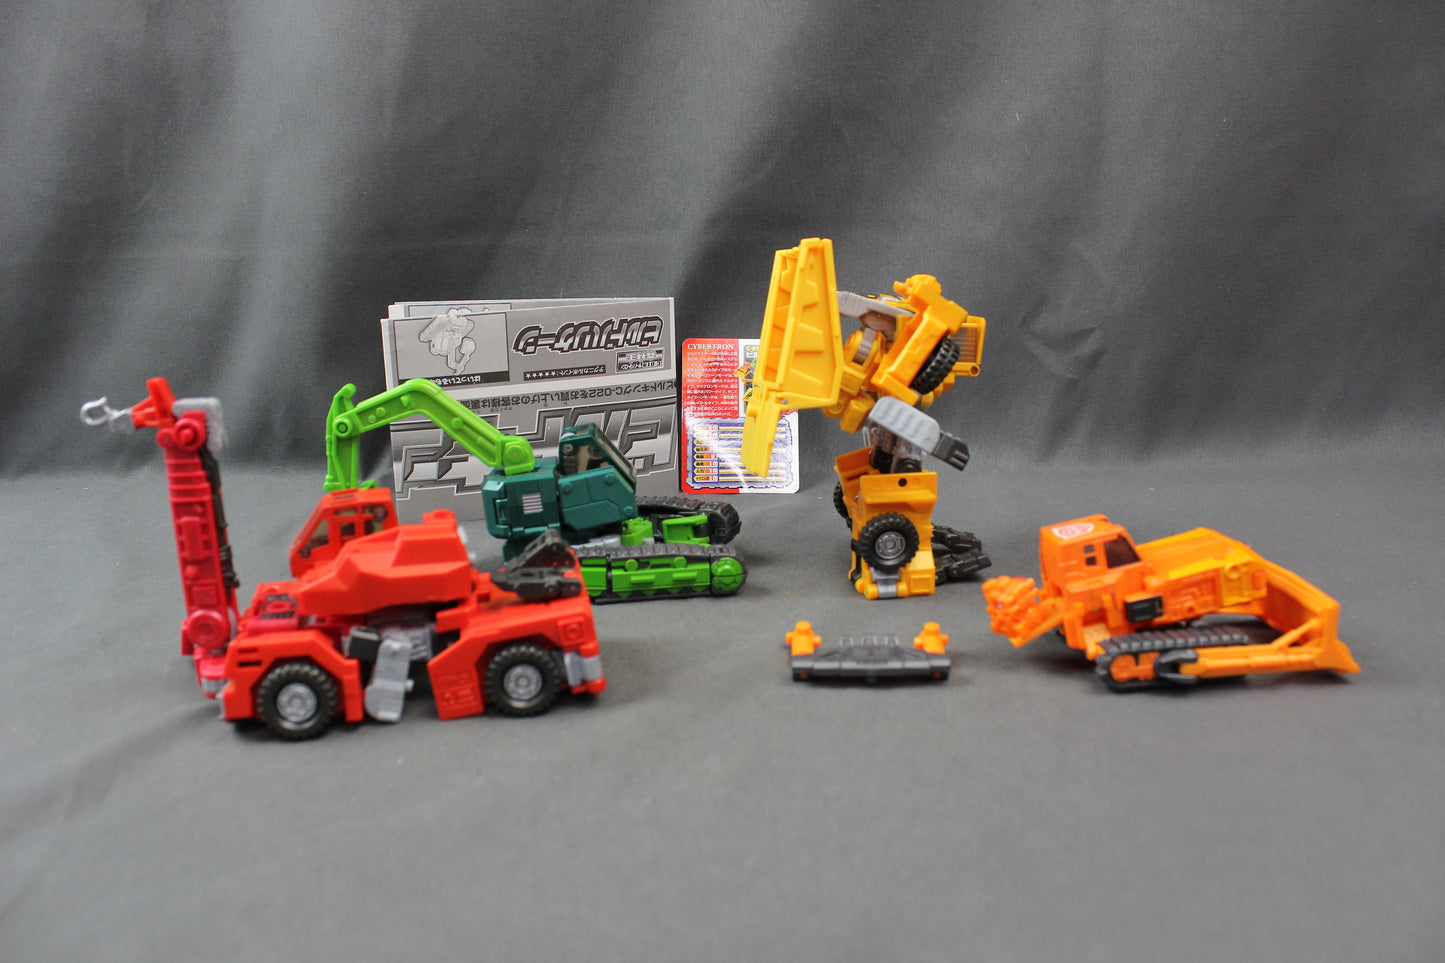 Landfill (Build Team) Complete Robots In Disguise Transformers Loose